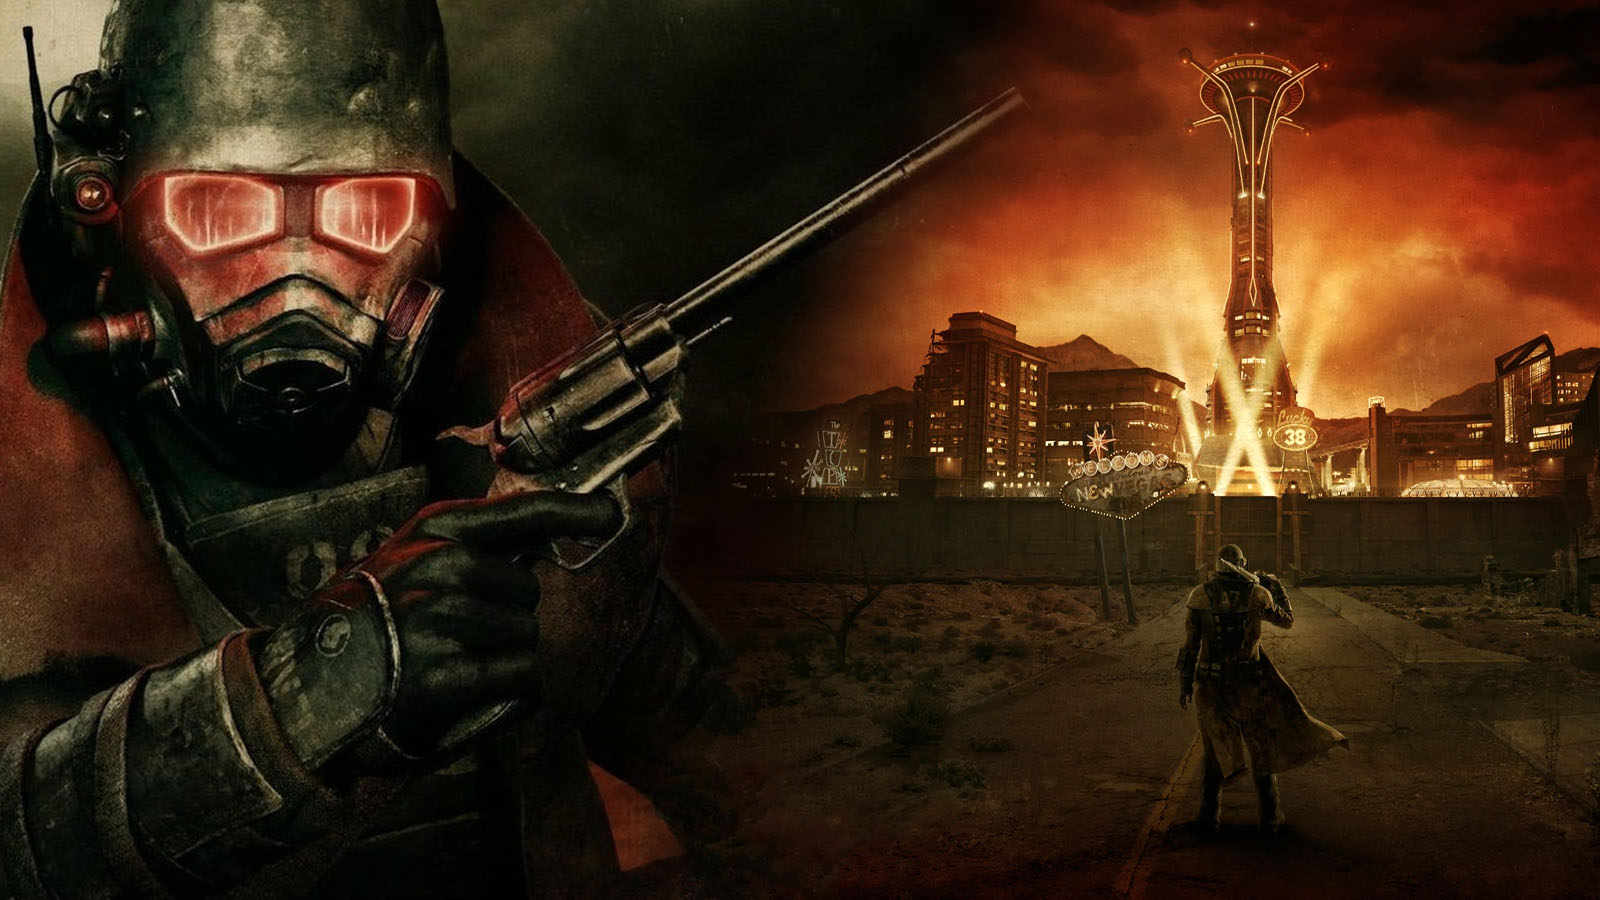 Fallout: New Vegas' City Would Shine in a Proper Remake